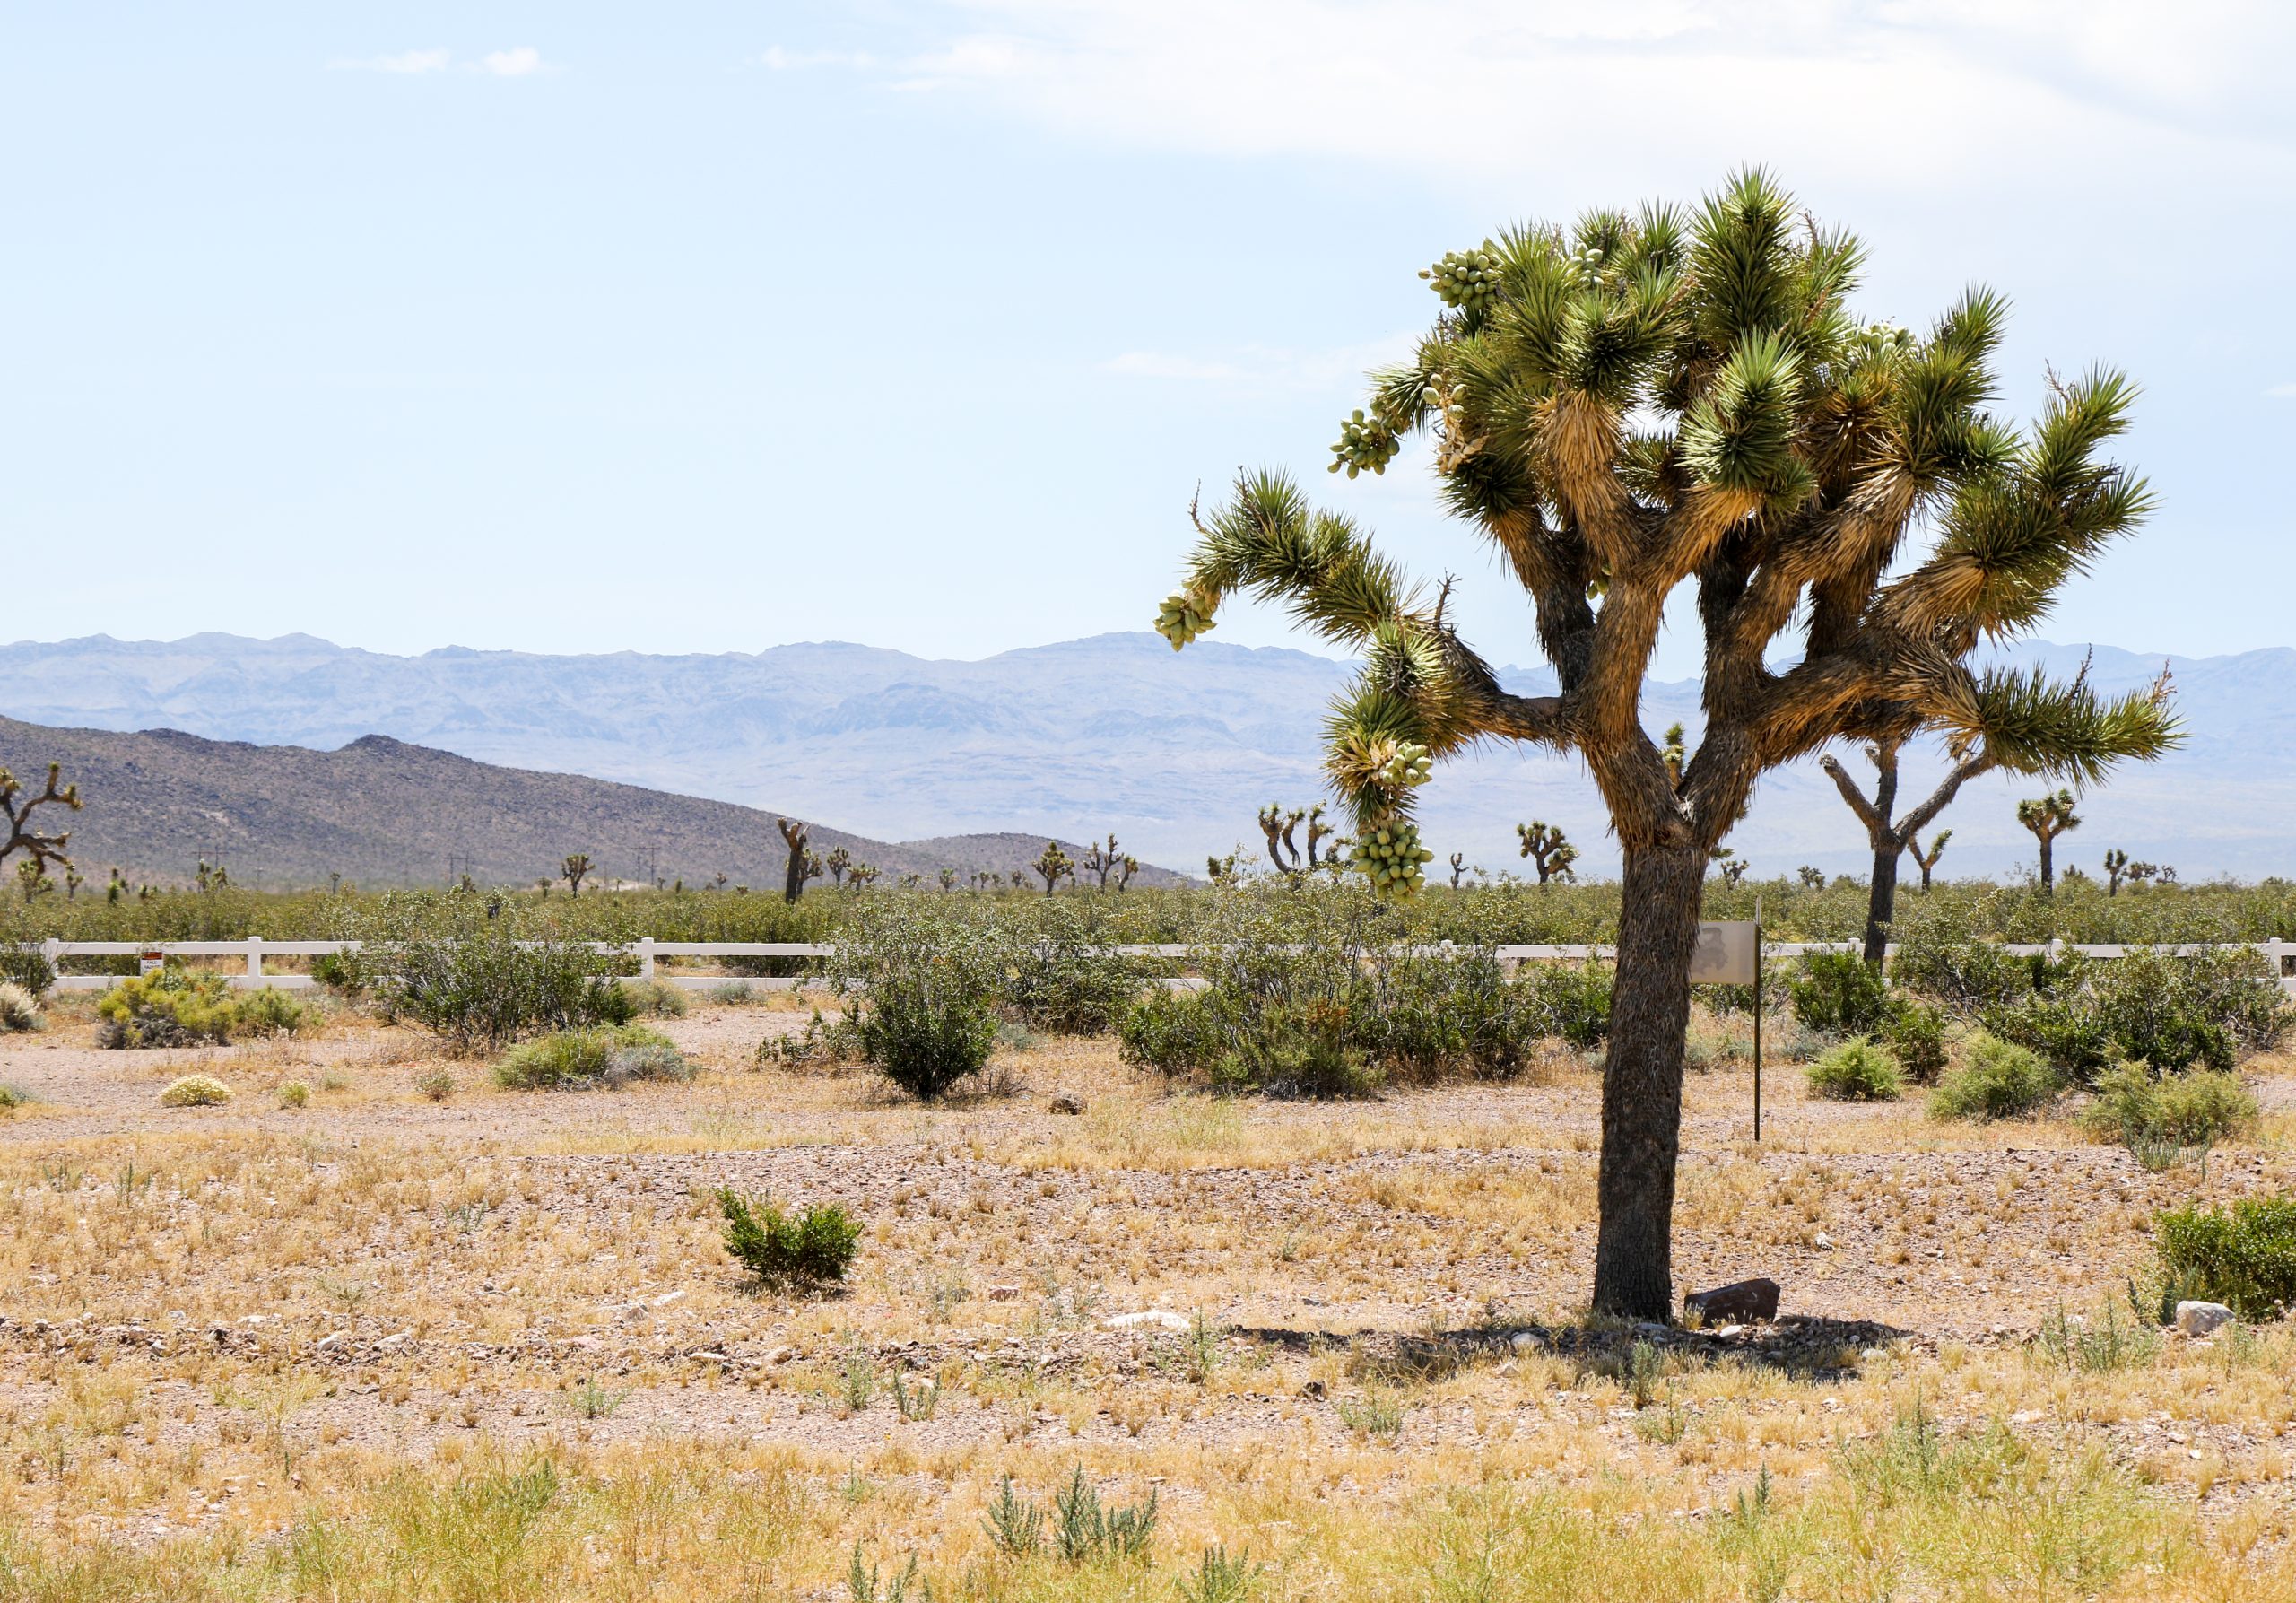 Joshua tree in right front with desert and mountains in the background